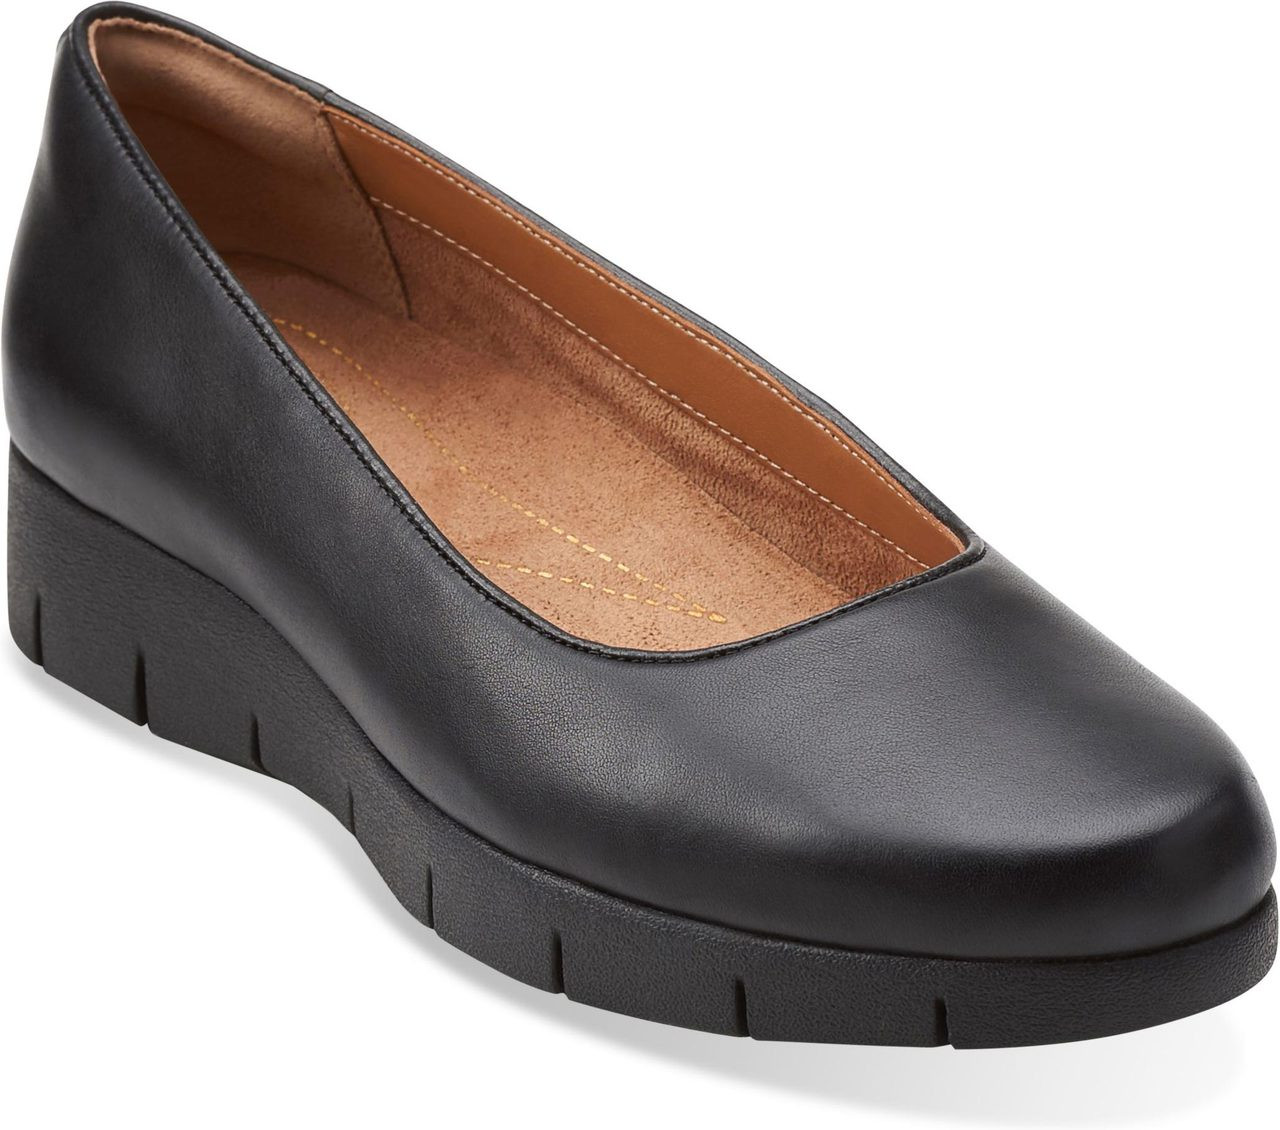 Clarks Women's Daelyn Towne - FREE Shipping & FREE Returns - Slip-On Shoes